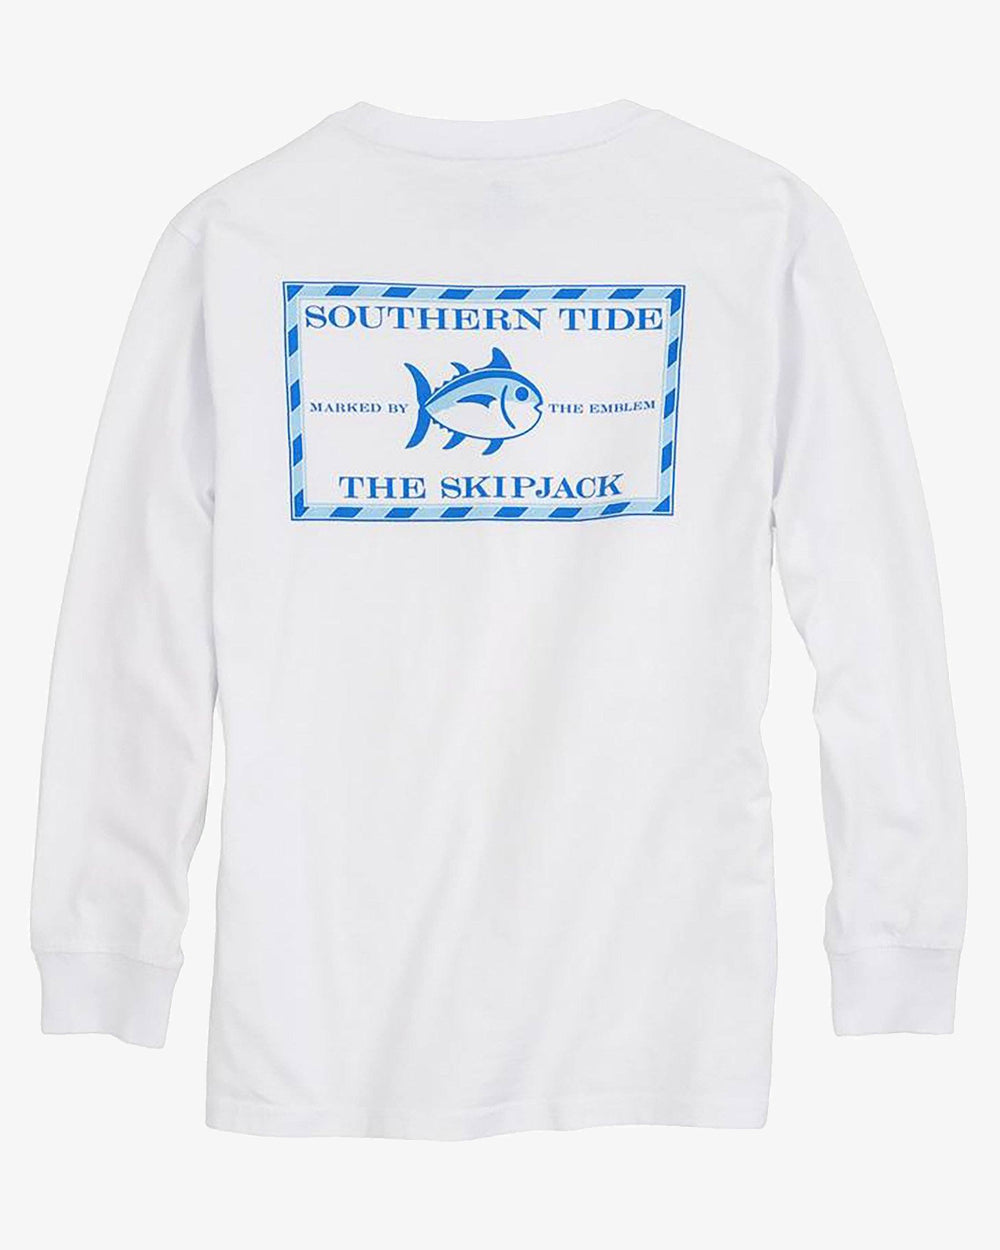 The back view of the Southern Tide Kids Long Sleeve Original Skipjack T-Shirt by Southern Tide - Classic White